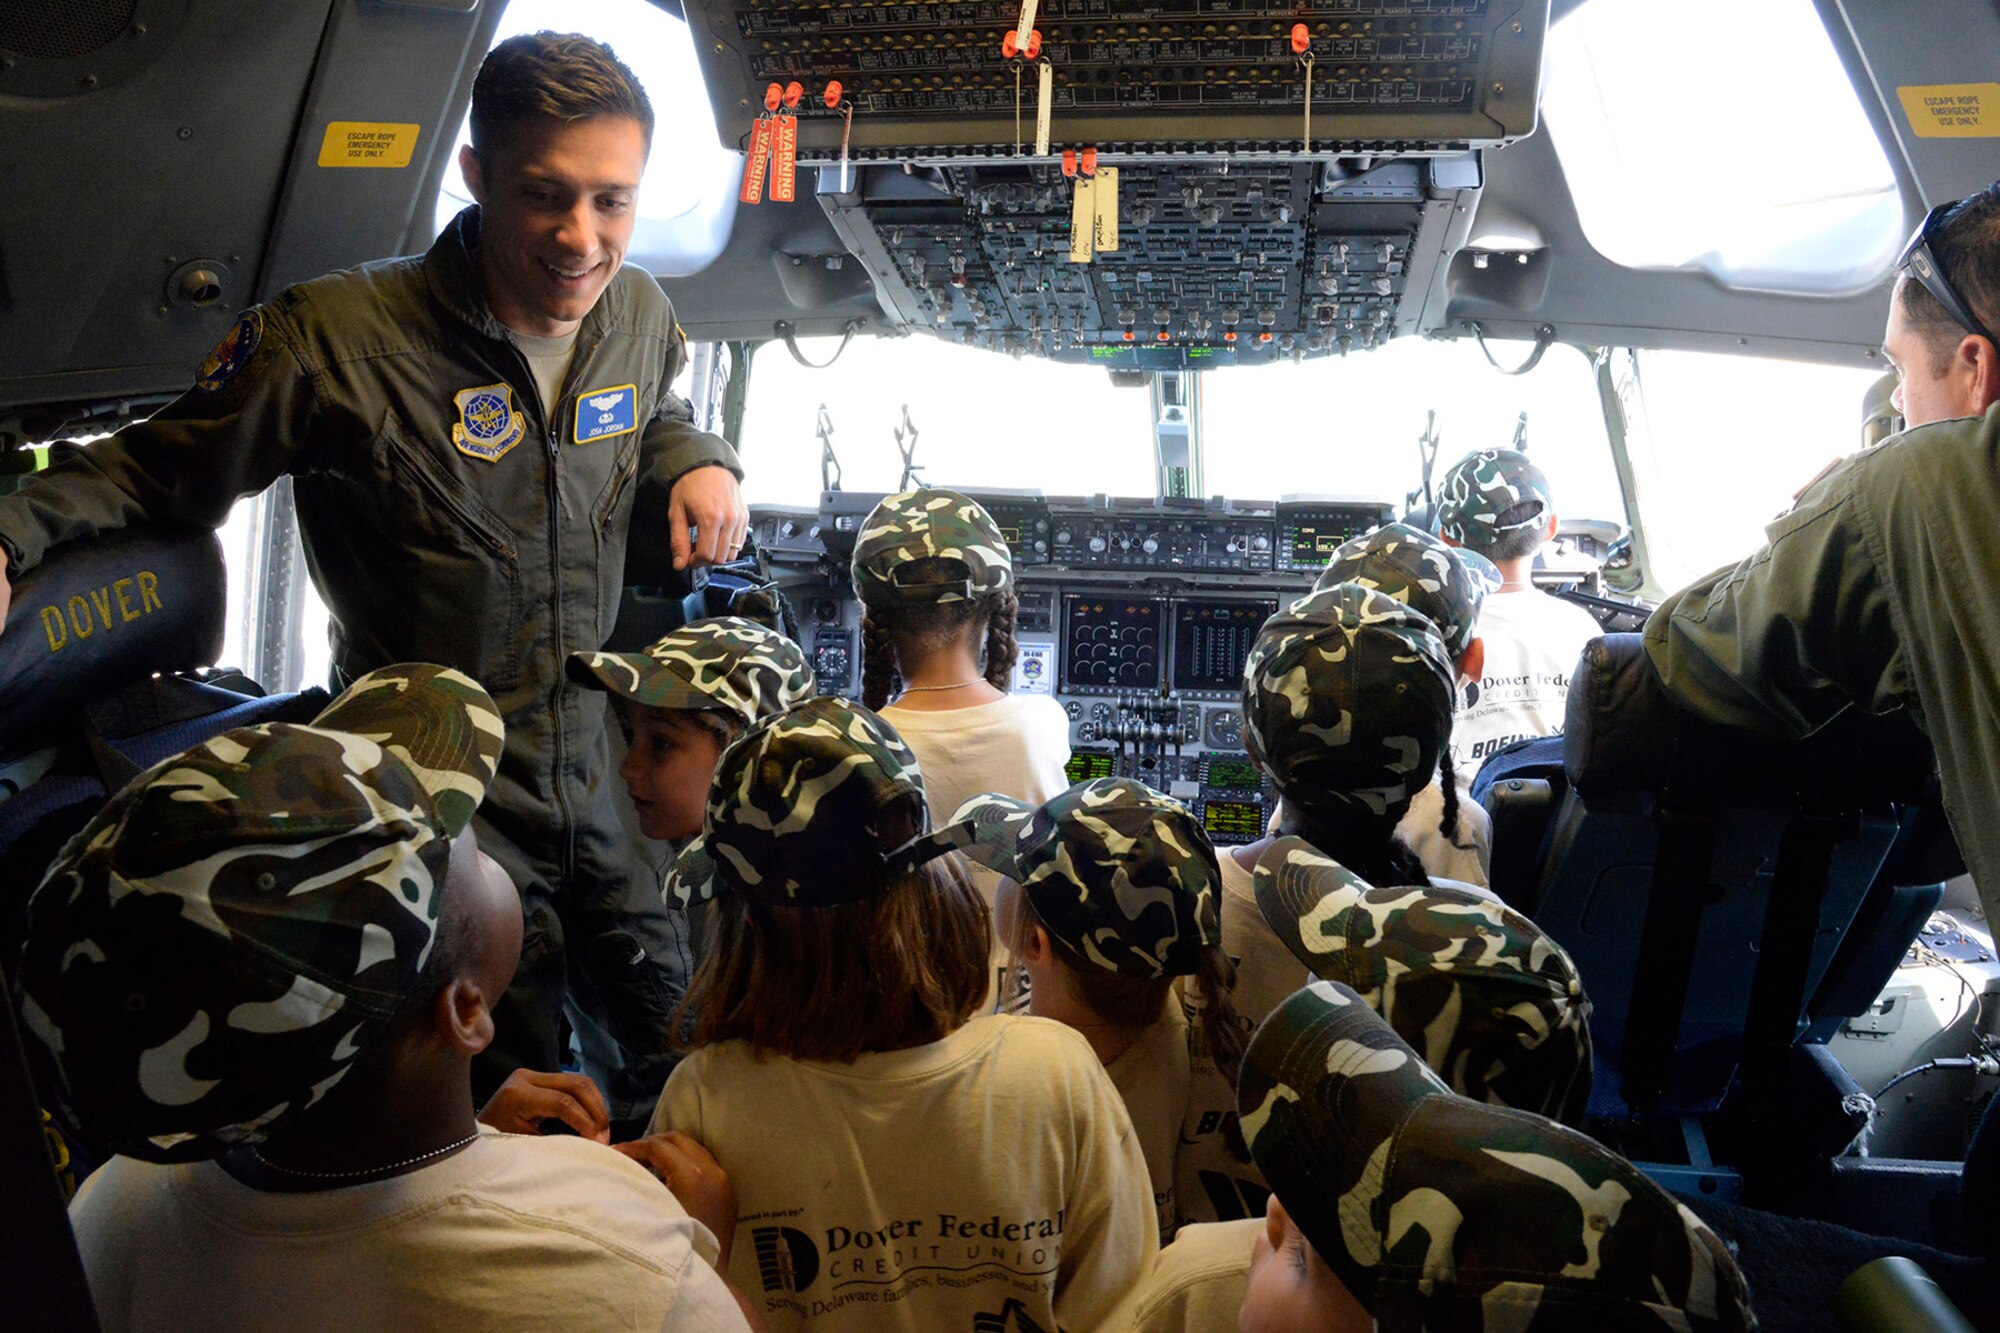 First Lt. Josh Jordan, 3rd Airlift Squadron pilot, shows children the cockpit of a static C-17 Globemaster III during a Kids/Teachers Understanding Deployment Operations event Aug. 9, 2018, at Dover Air Force Base, Del. Children and teachers attending the event received a behind-the-scenes view of Team Dover’s mobility aircraft. (U.S. Air Force photo by Tech. Sgt. Matt Davis)